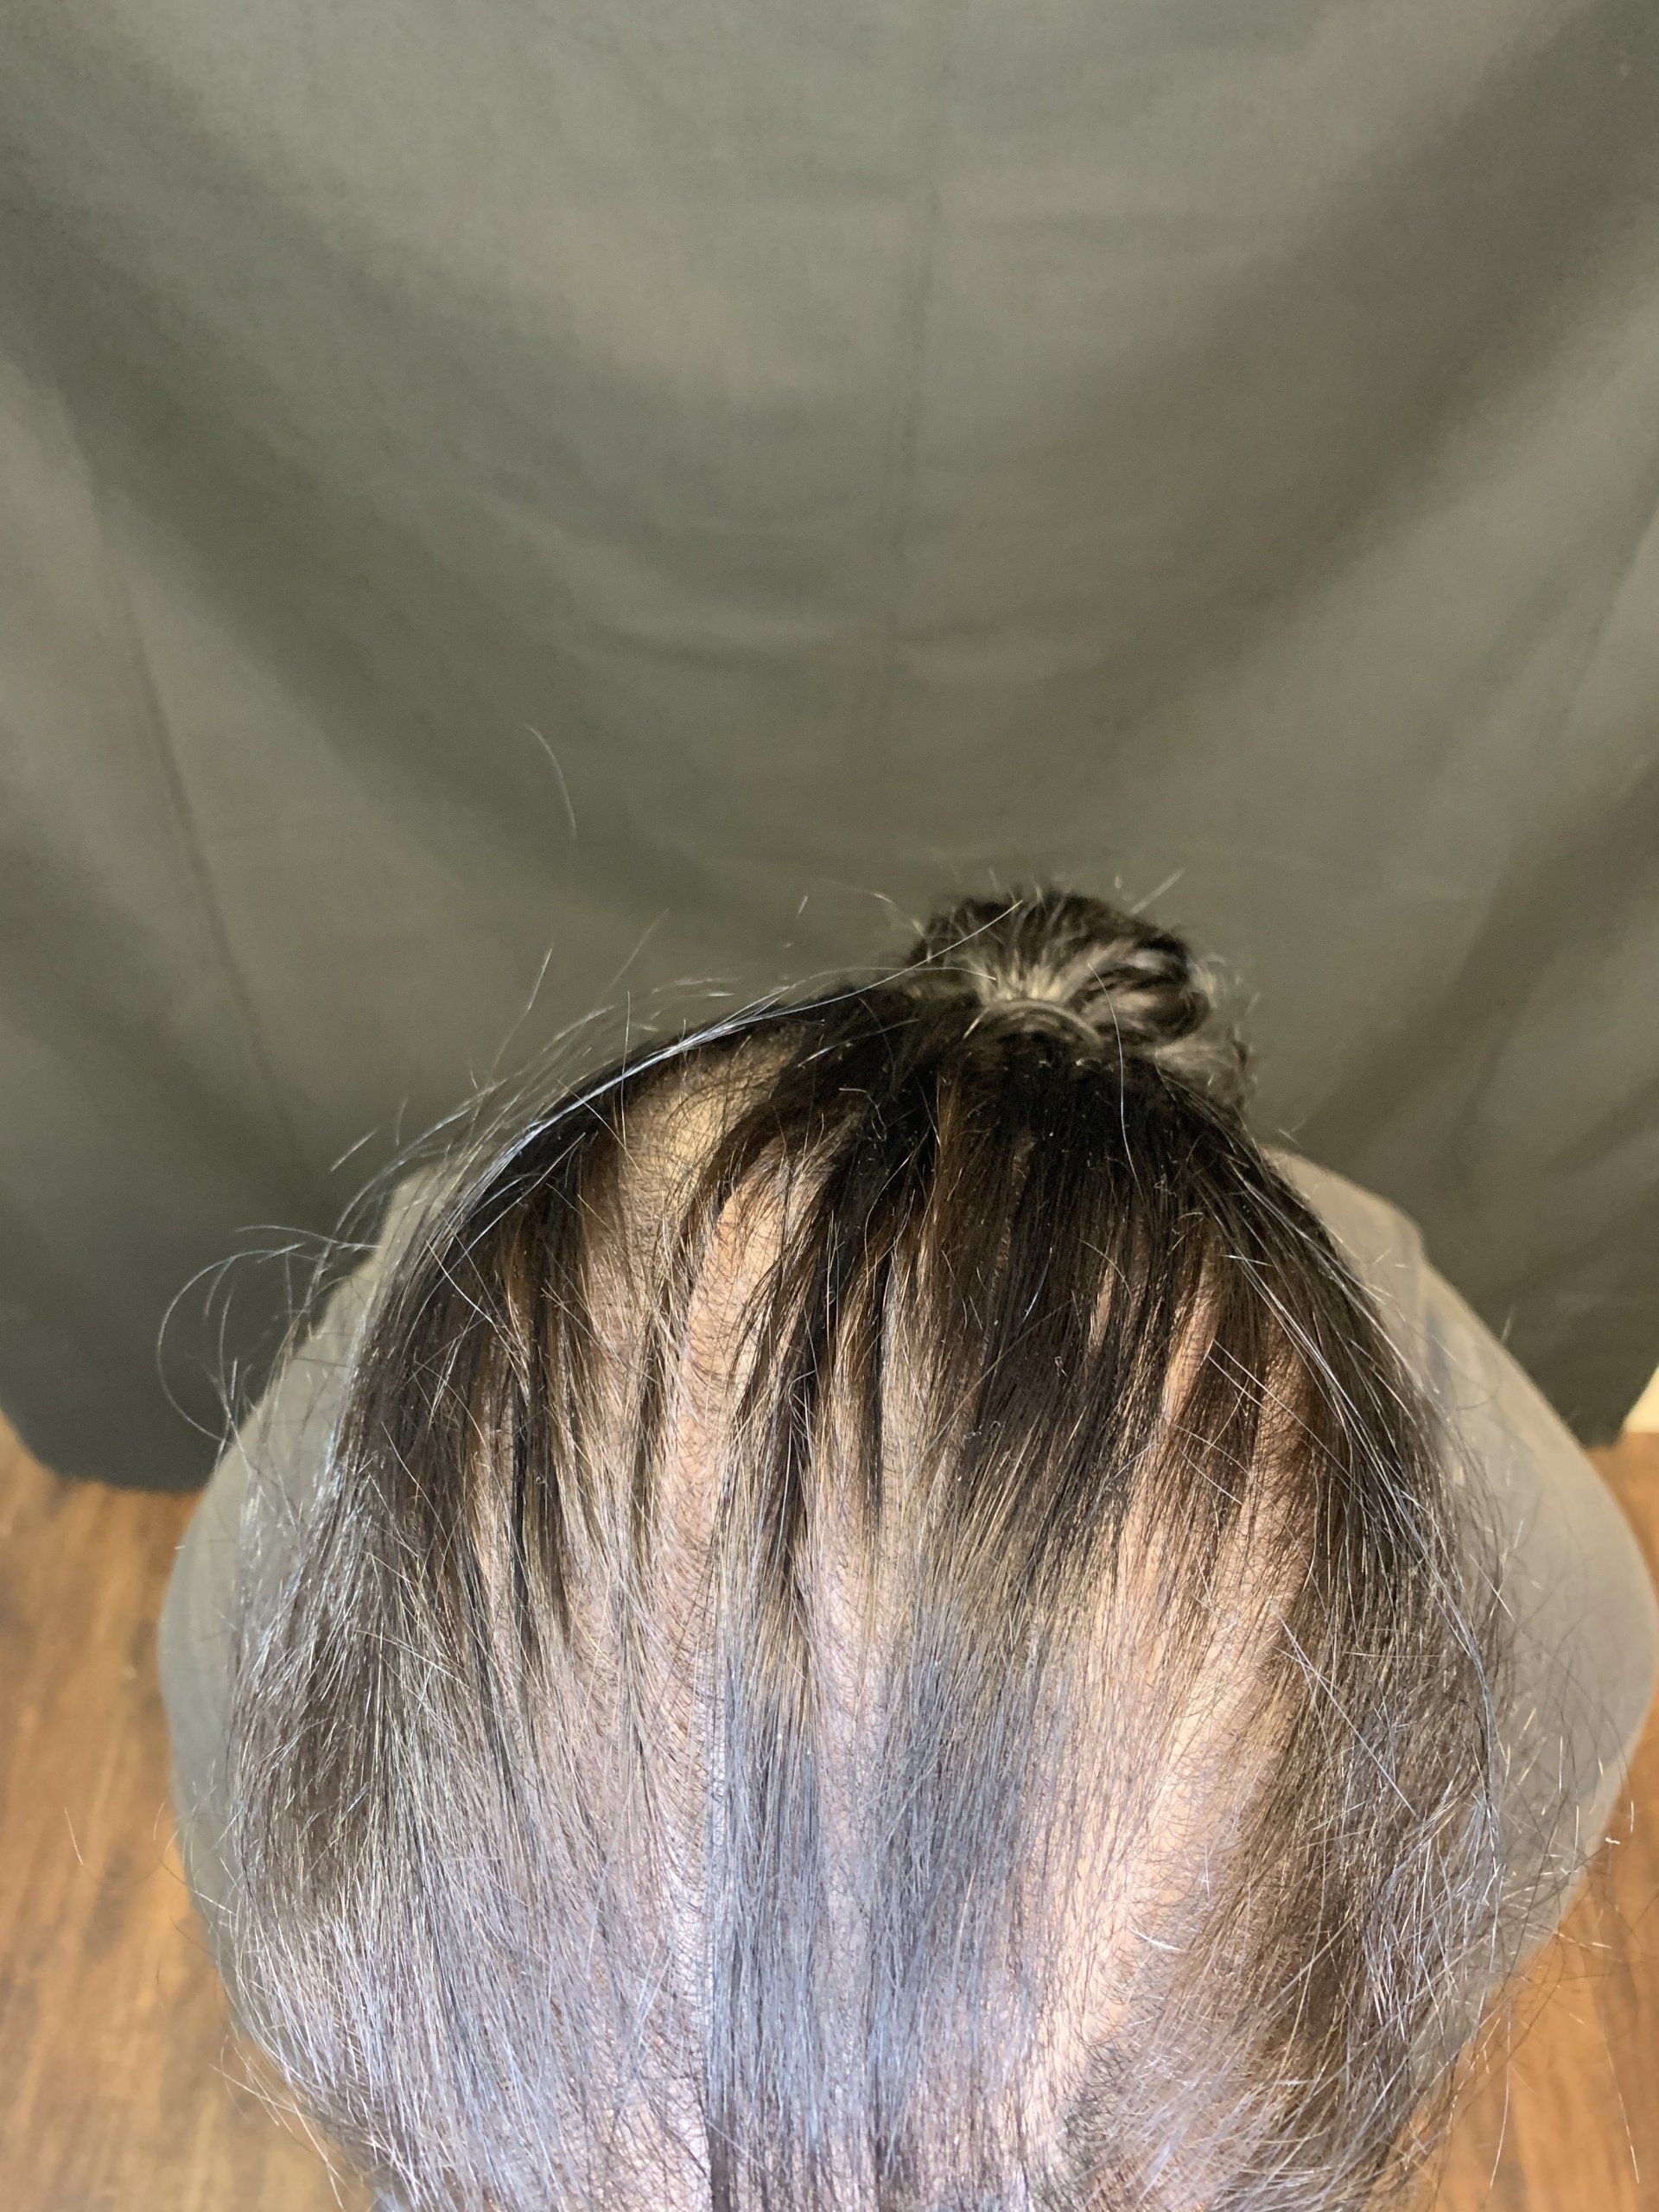 A picture taken before woman gets scalp micropigmentation hair density treatment to create fuller hair